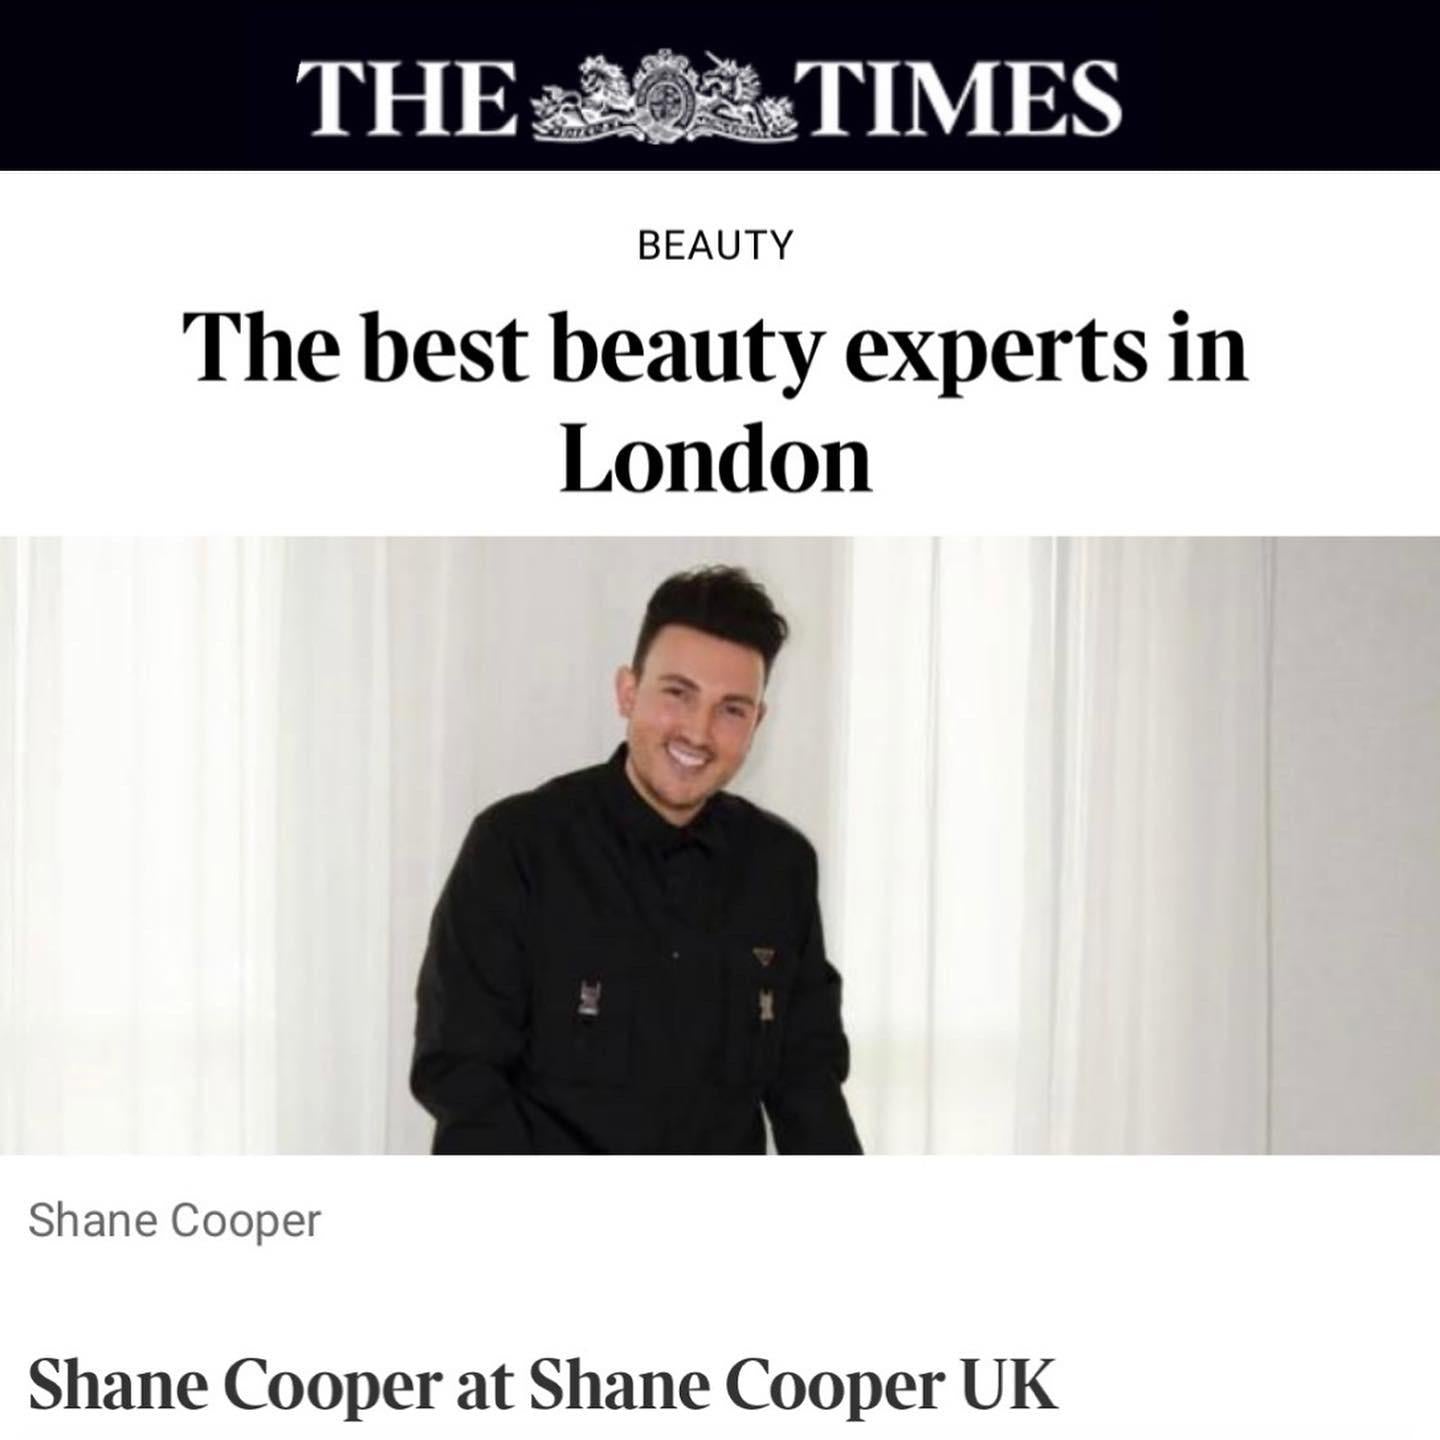 Shane Cooper Featured in The Times: The best beauty experts in London